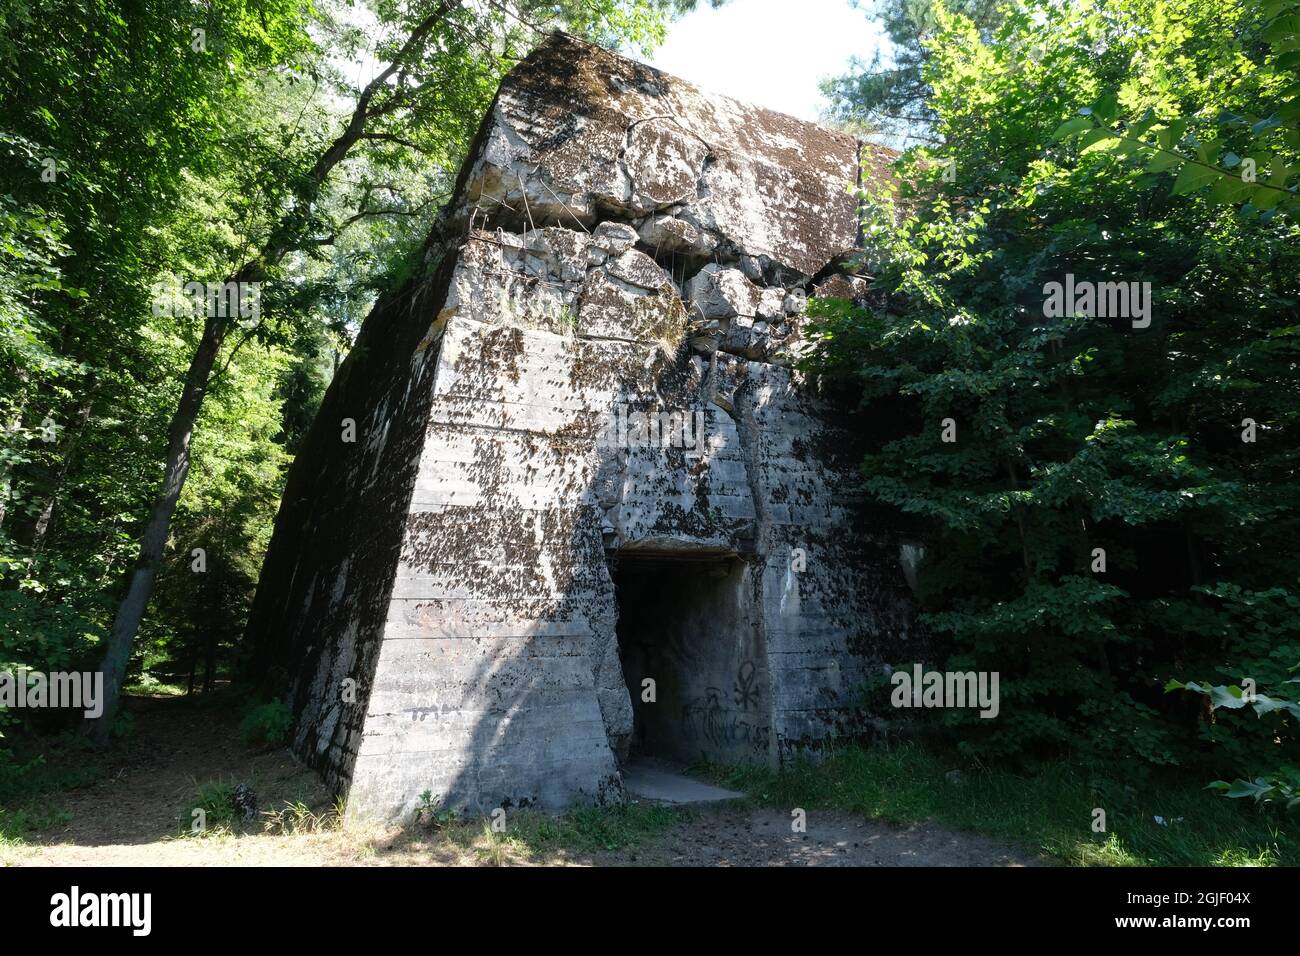 Pozezdrze, Poland - July 20, 2021: Heinrich Himmler's bunker at the SS Field Command Post Hochwald built by the Organisation Todt. Stock Photo